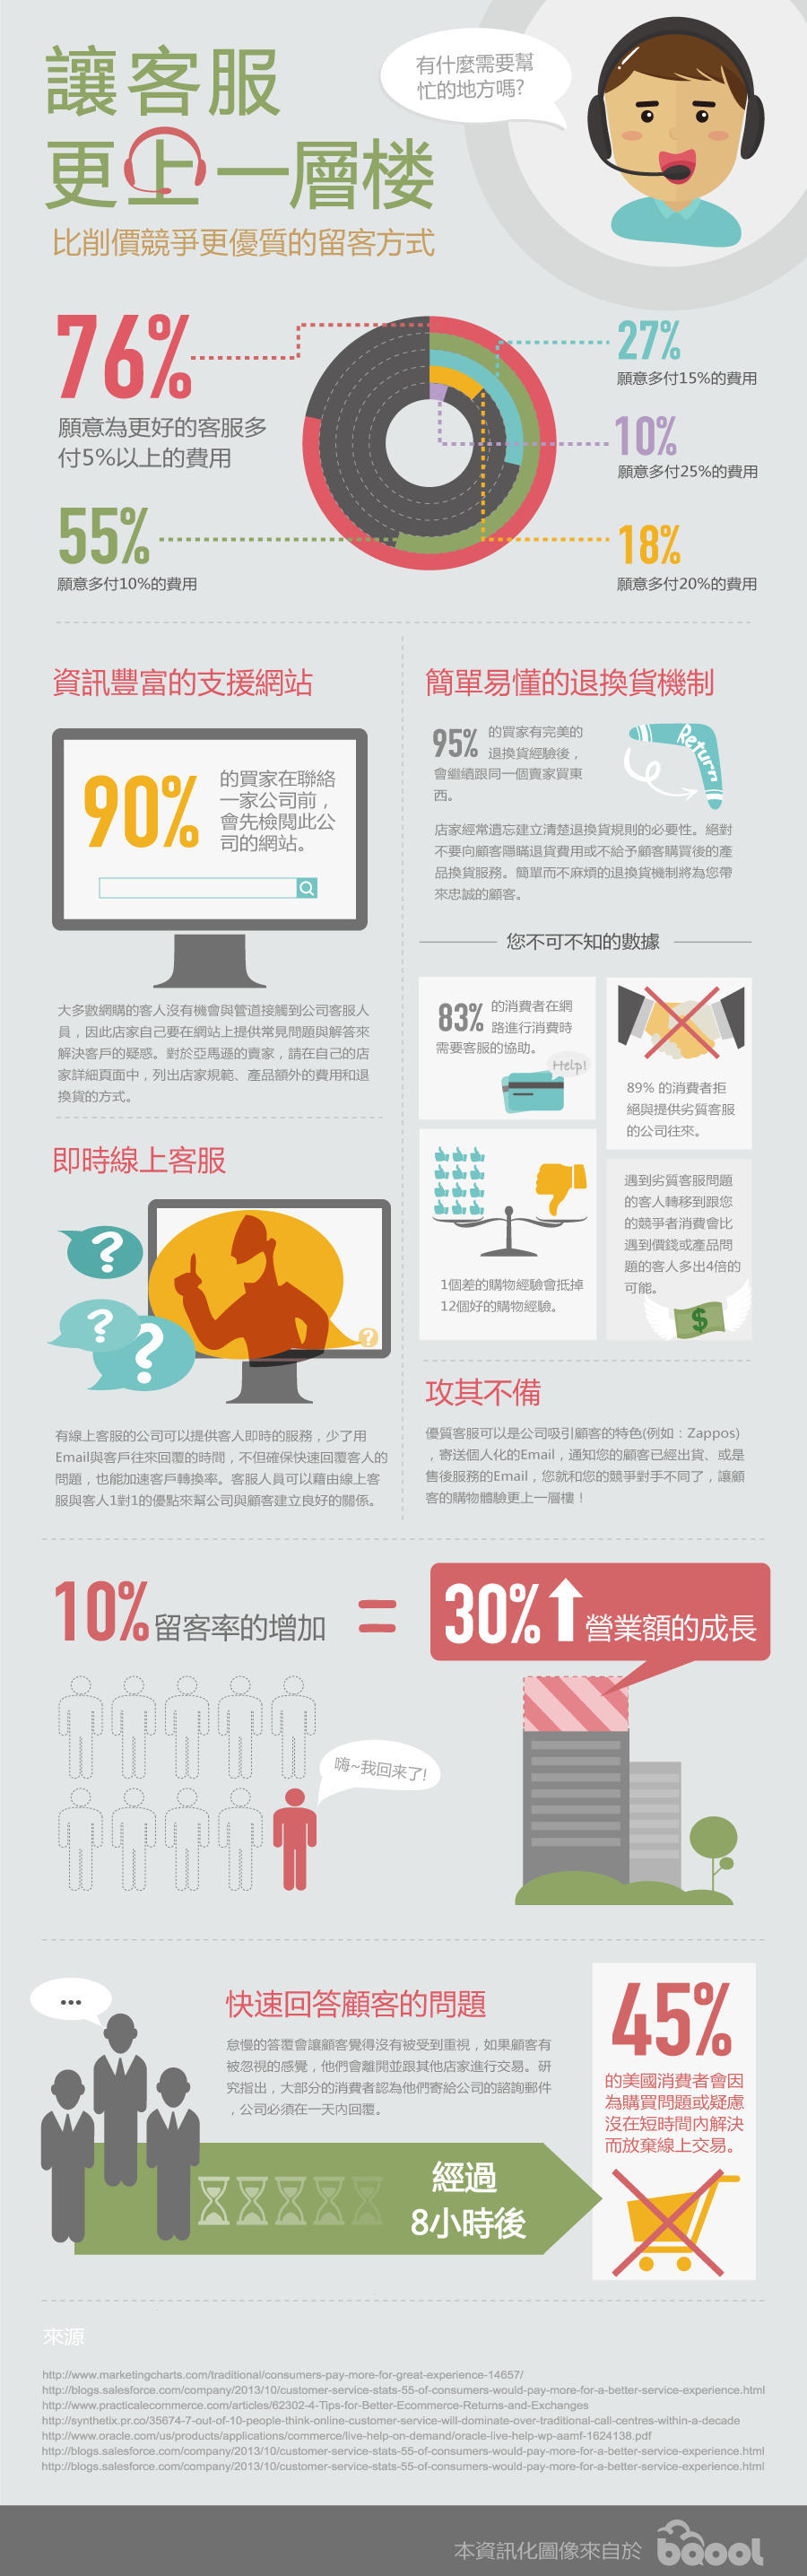 customer-service-tw-chinese (1)